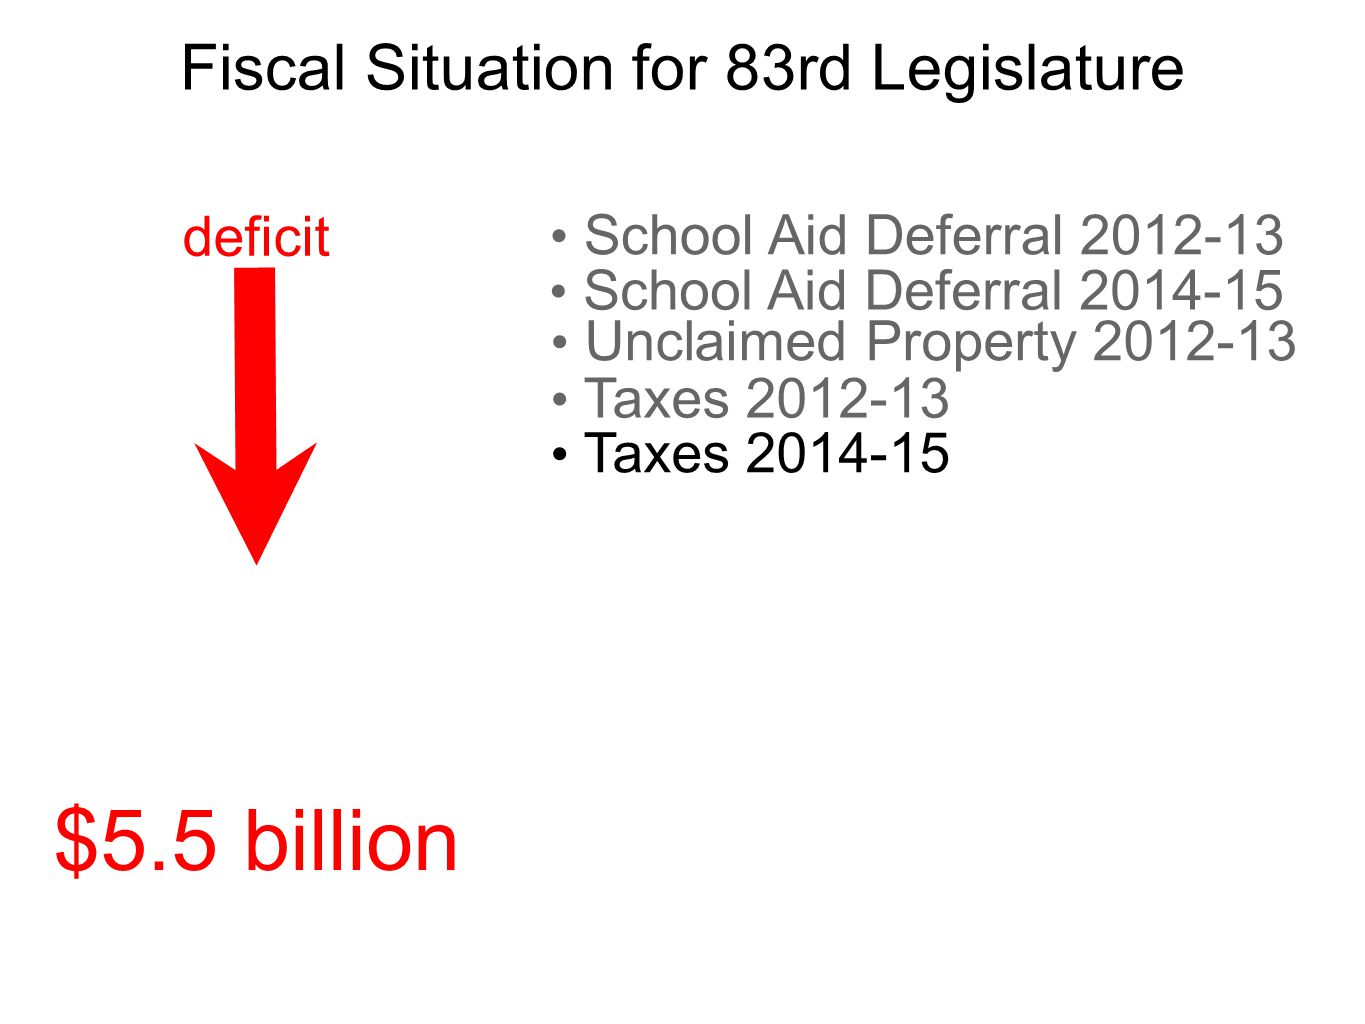 Fiscal Situation for 83rd Legislature deficit $5.5 billion School Aid Deferral School Aid Deferral Unclaimed Property Taxes Taxes